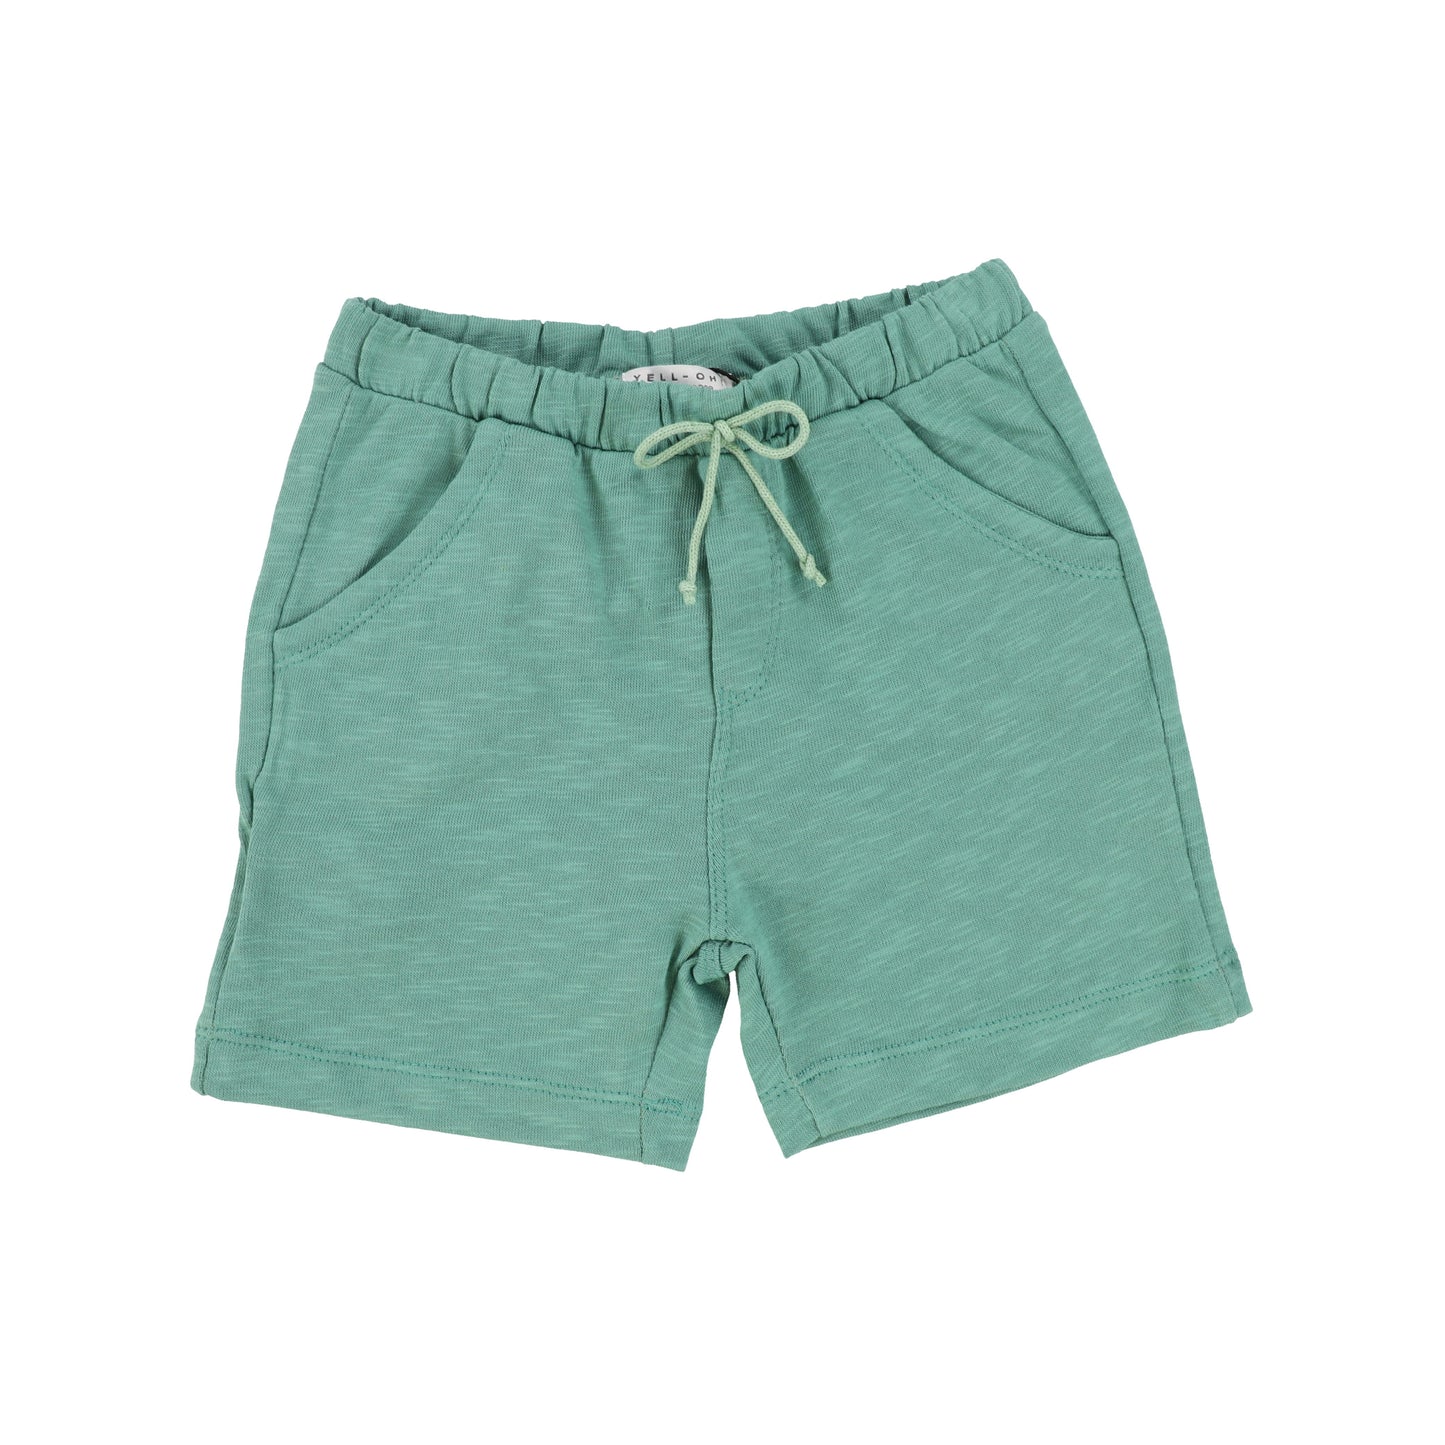 Yell Oh Green Marled Shorts [Final Sale]